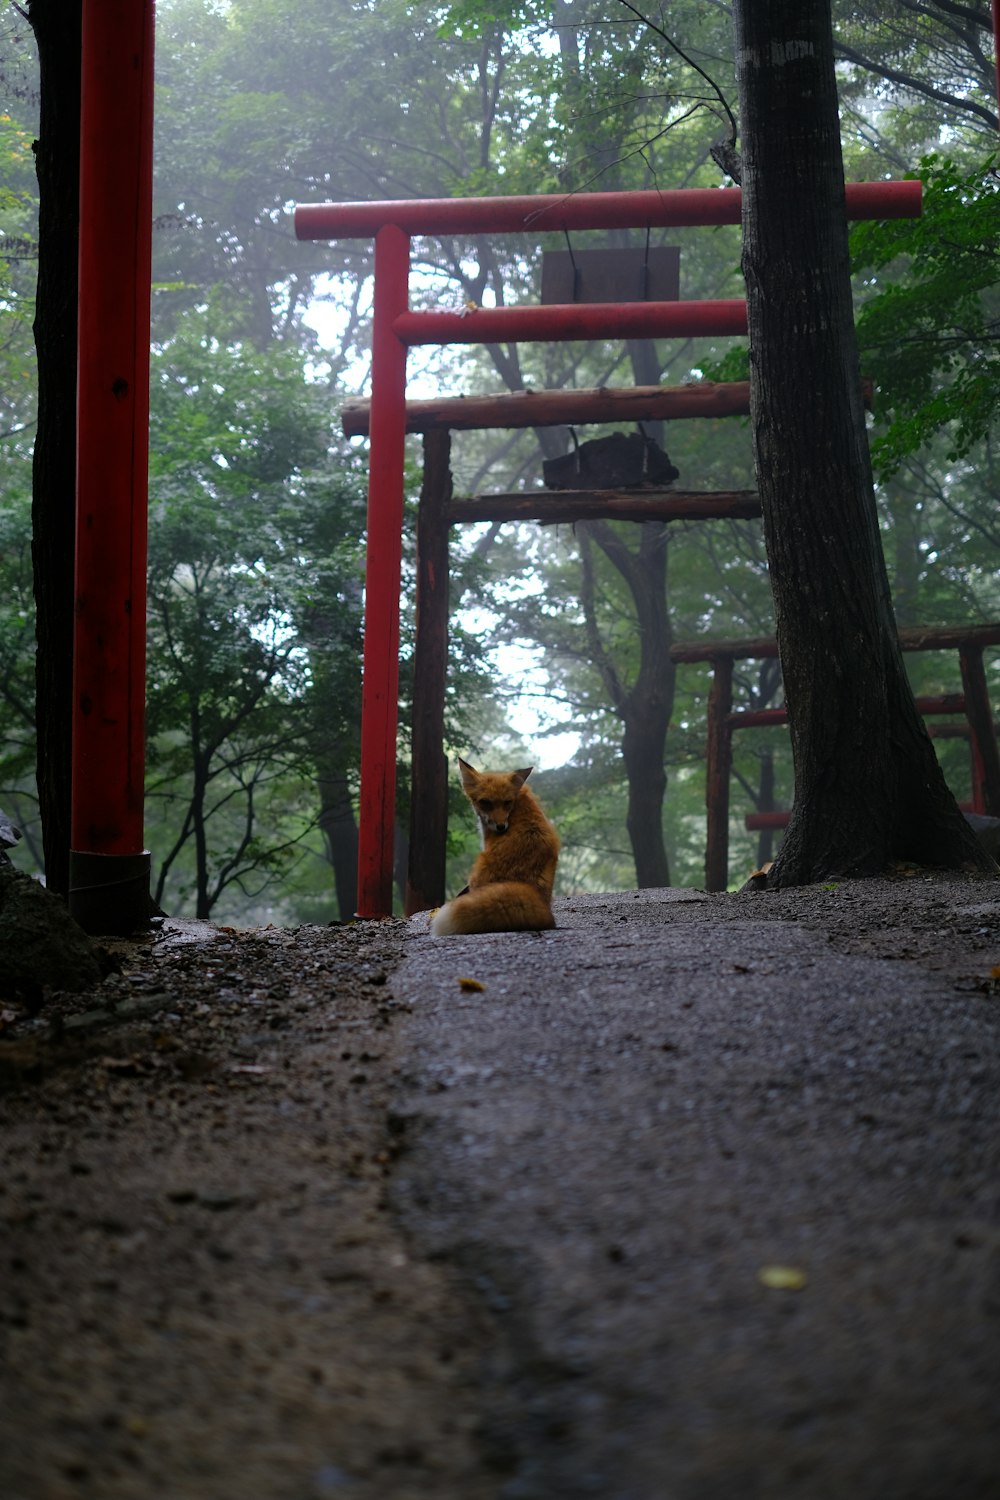 a cat sitting on the ground in front of a red structure